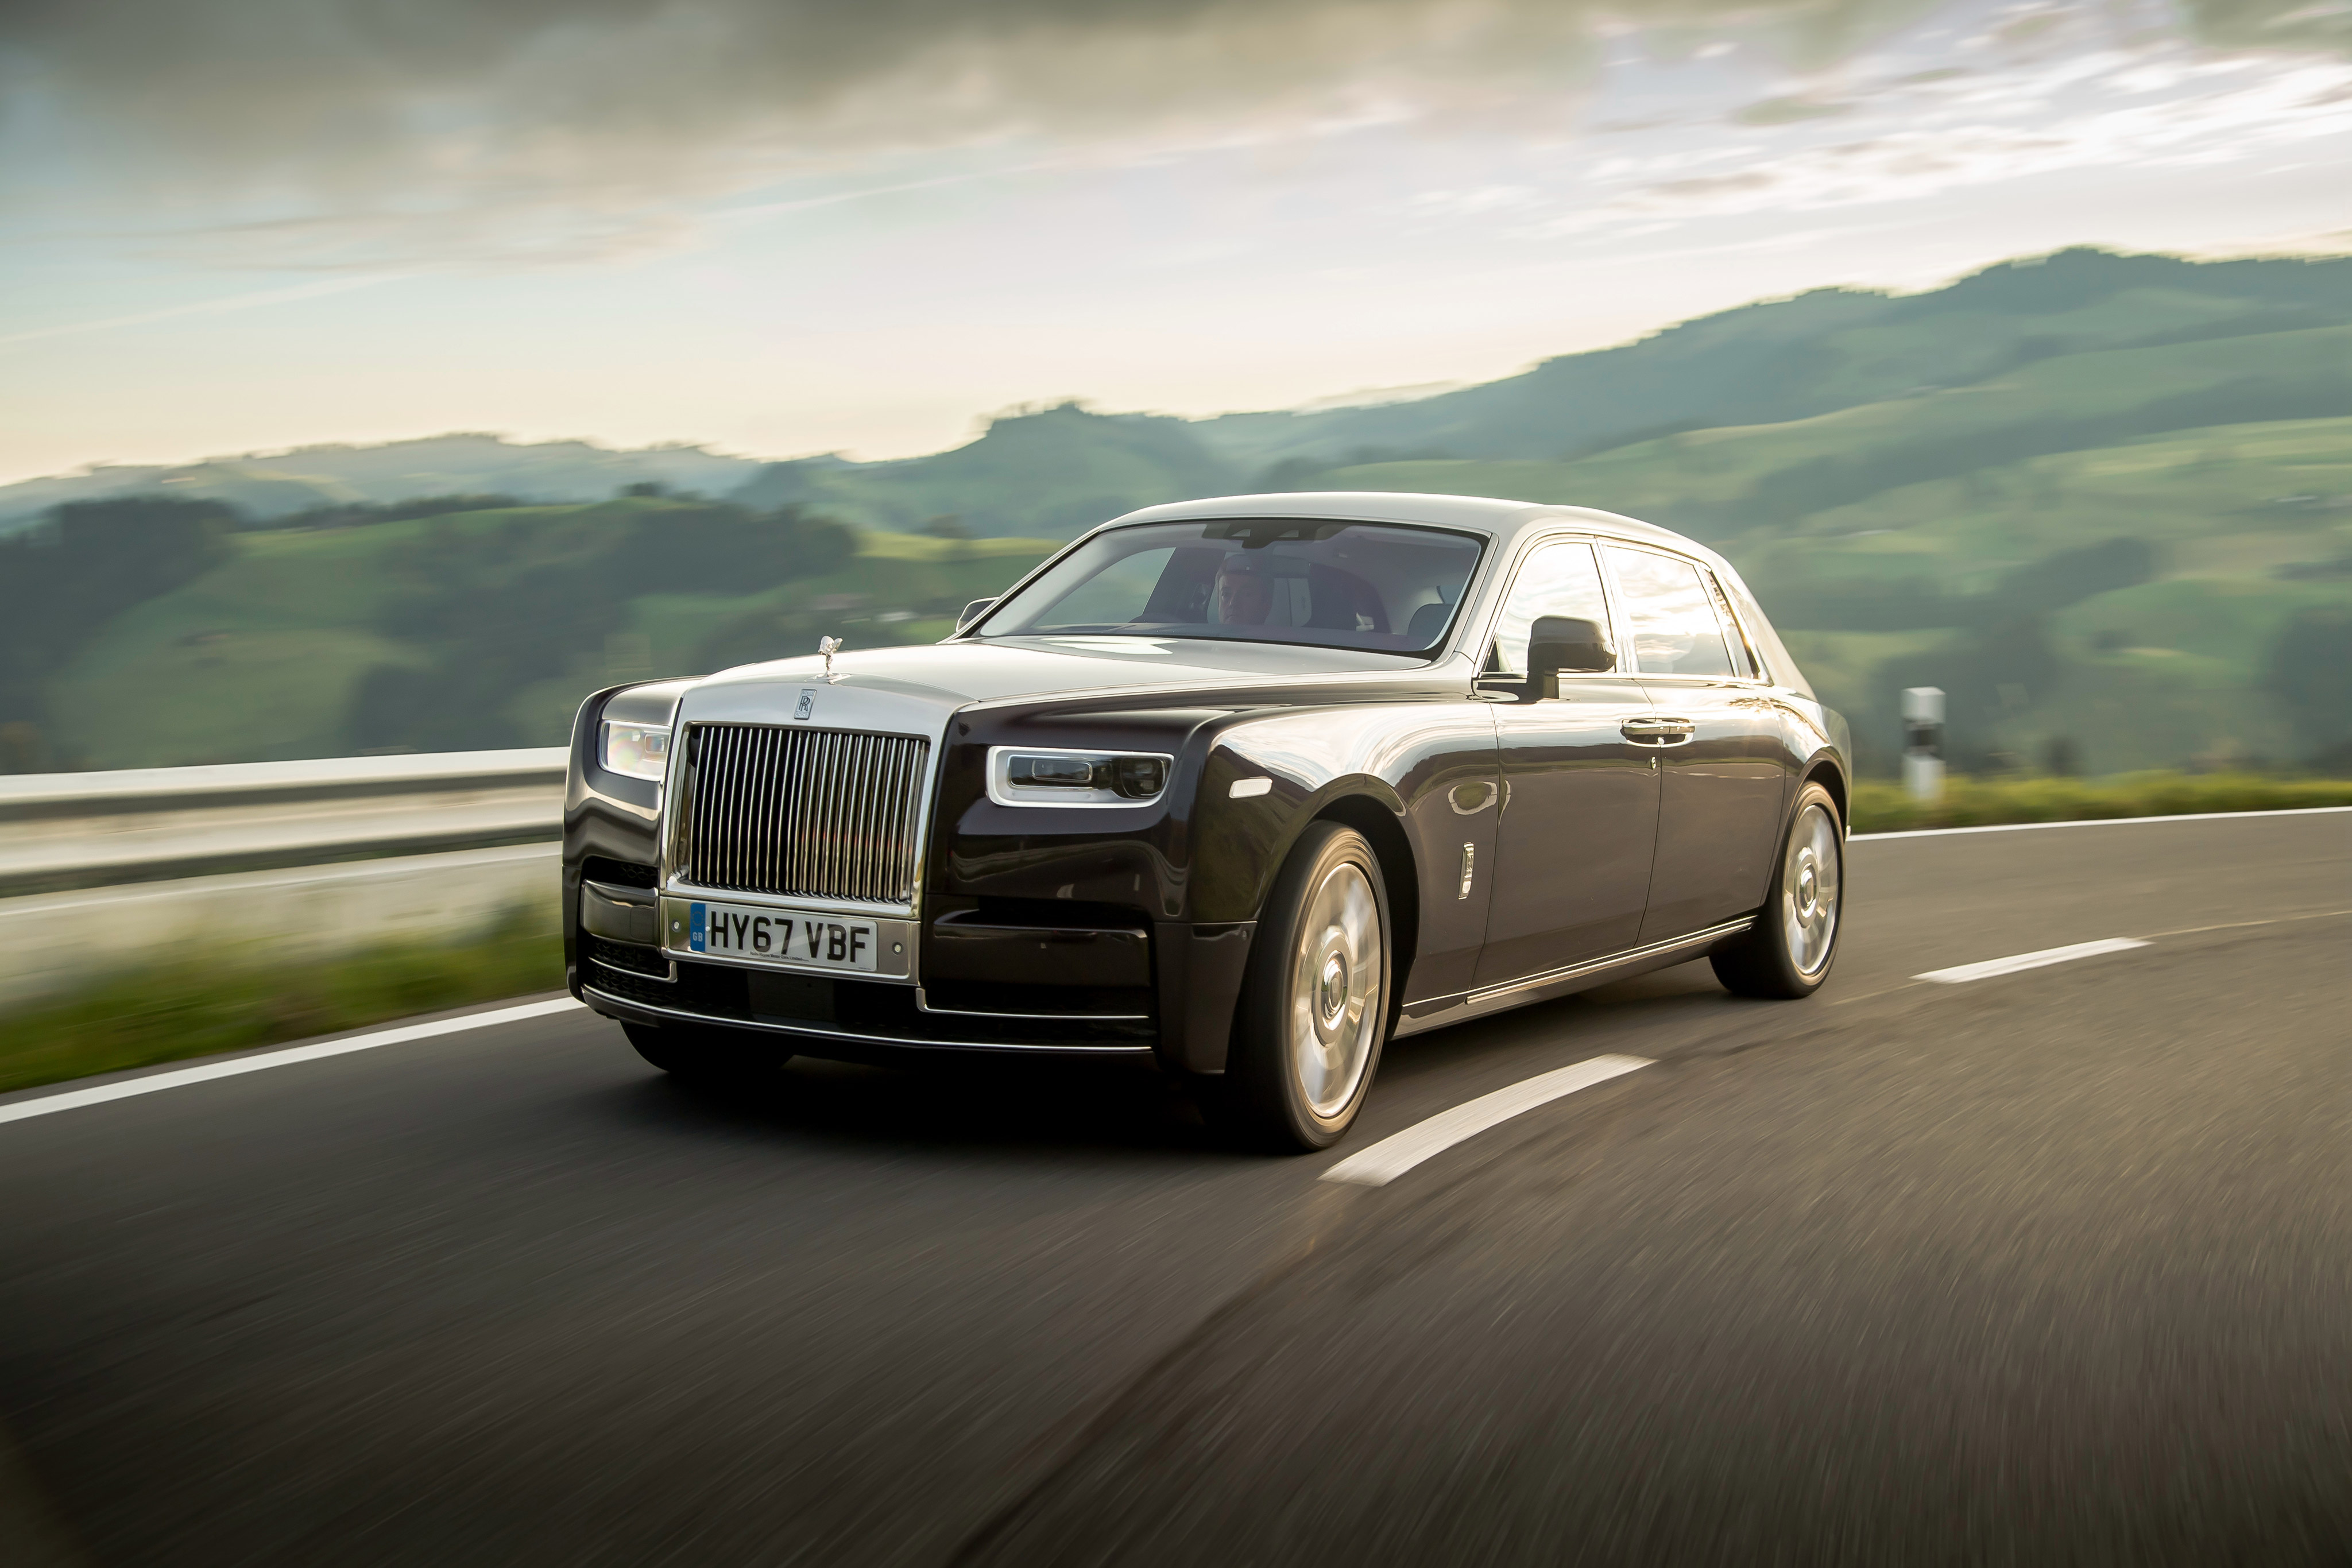 Car Rolls Royce Luxury Cars British Cars Frontal View Road Vehicle Clouds Sky Licence Plates Sunligh 4096x2731